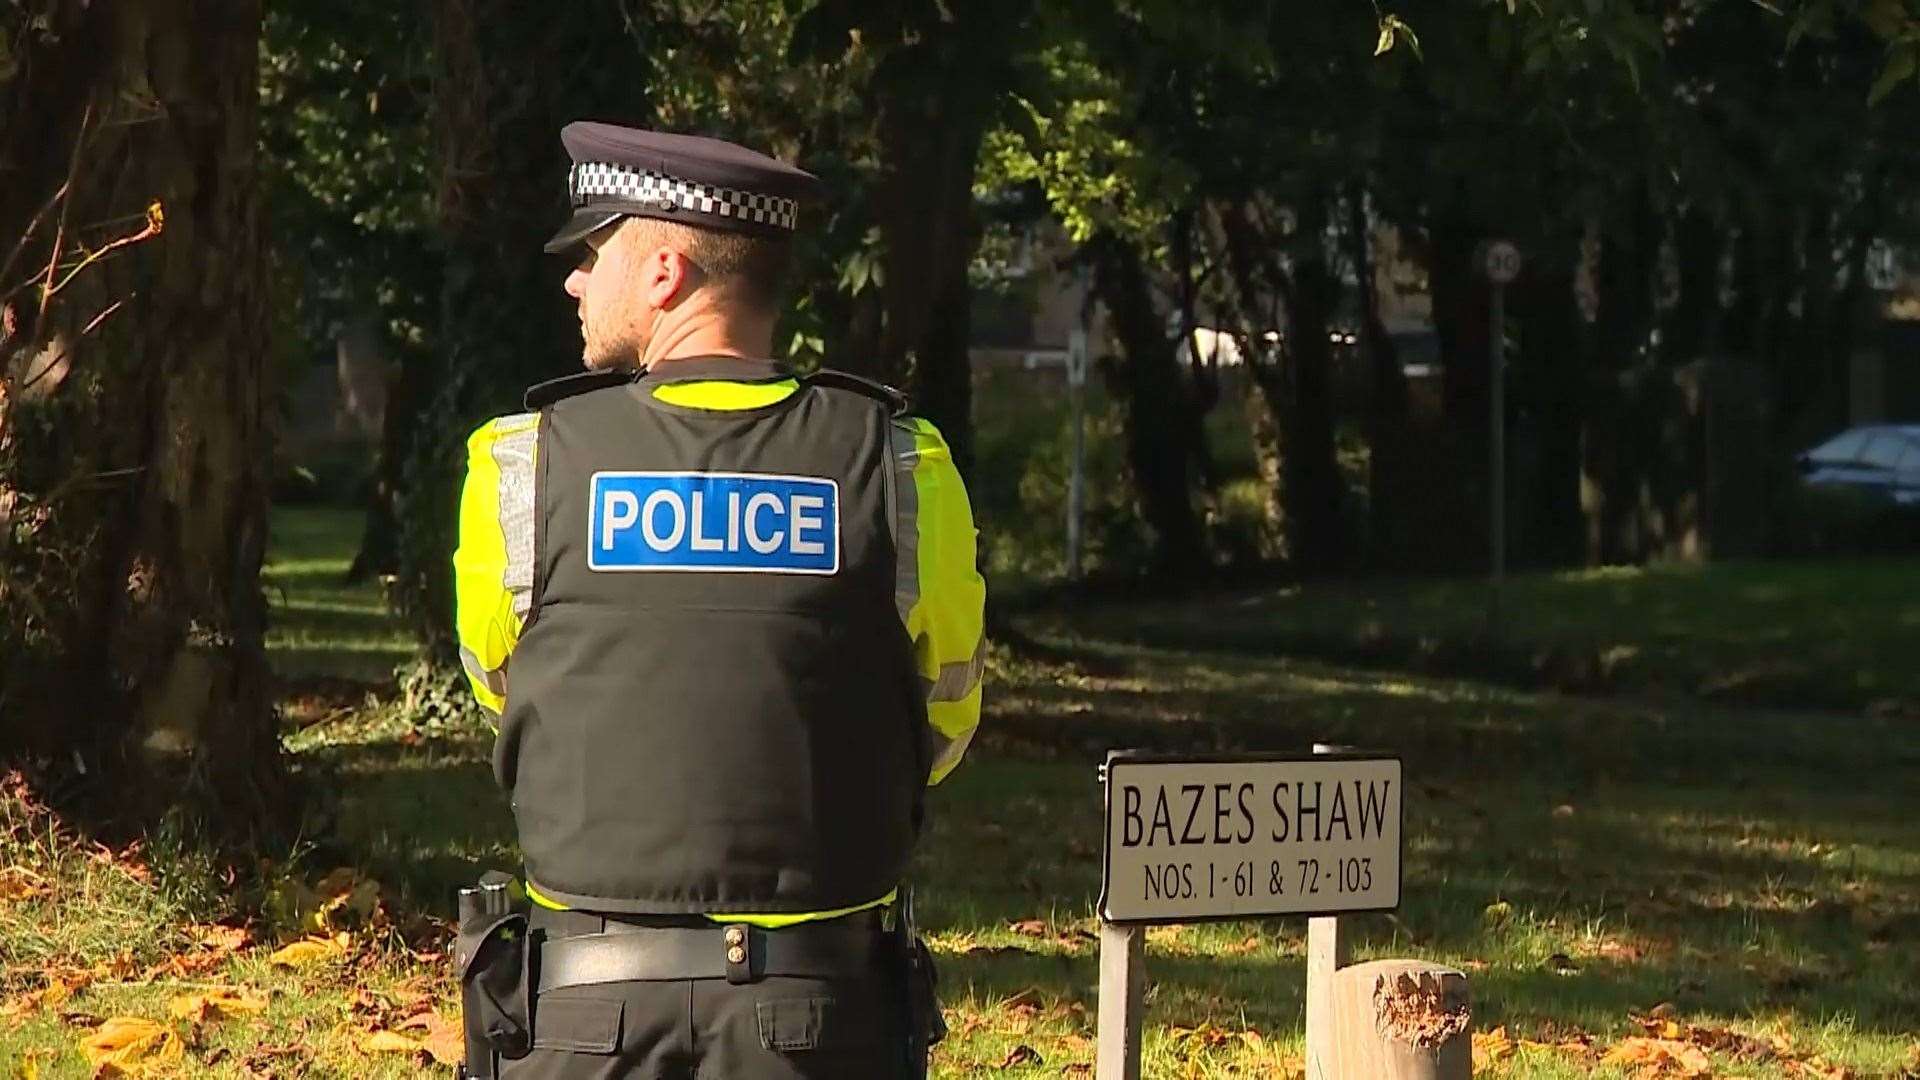 Police in Bazes Shaw in New Ash Green